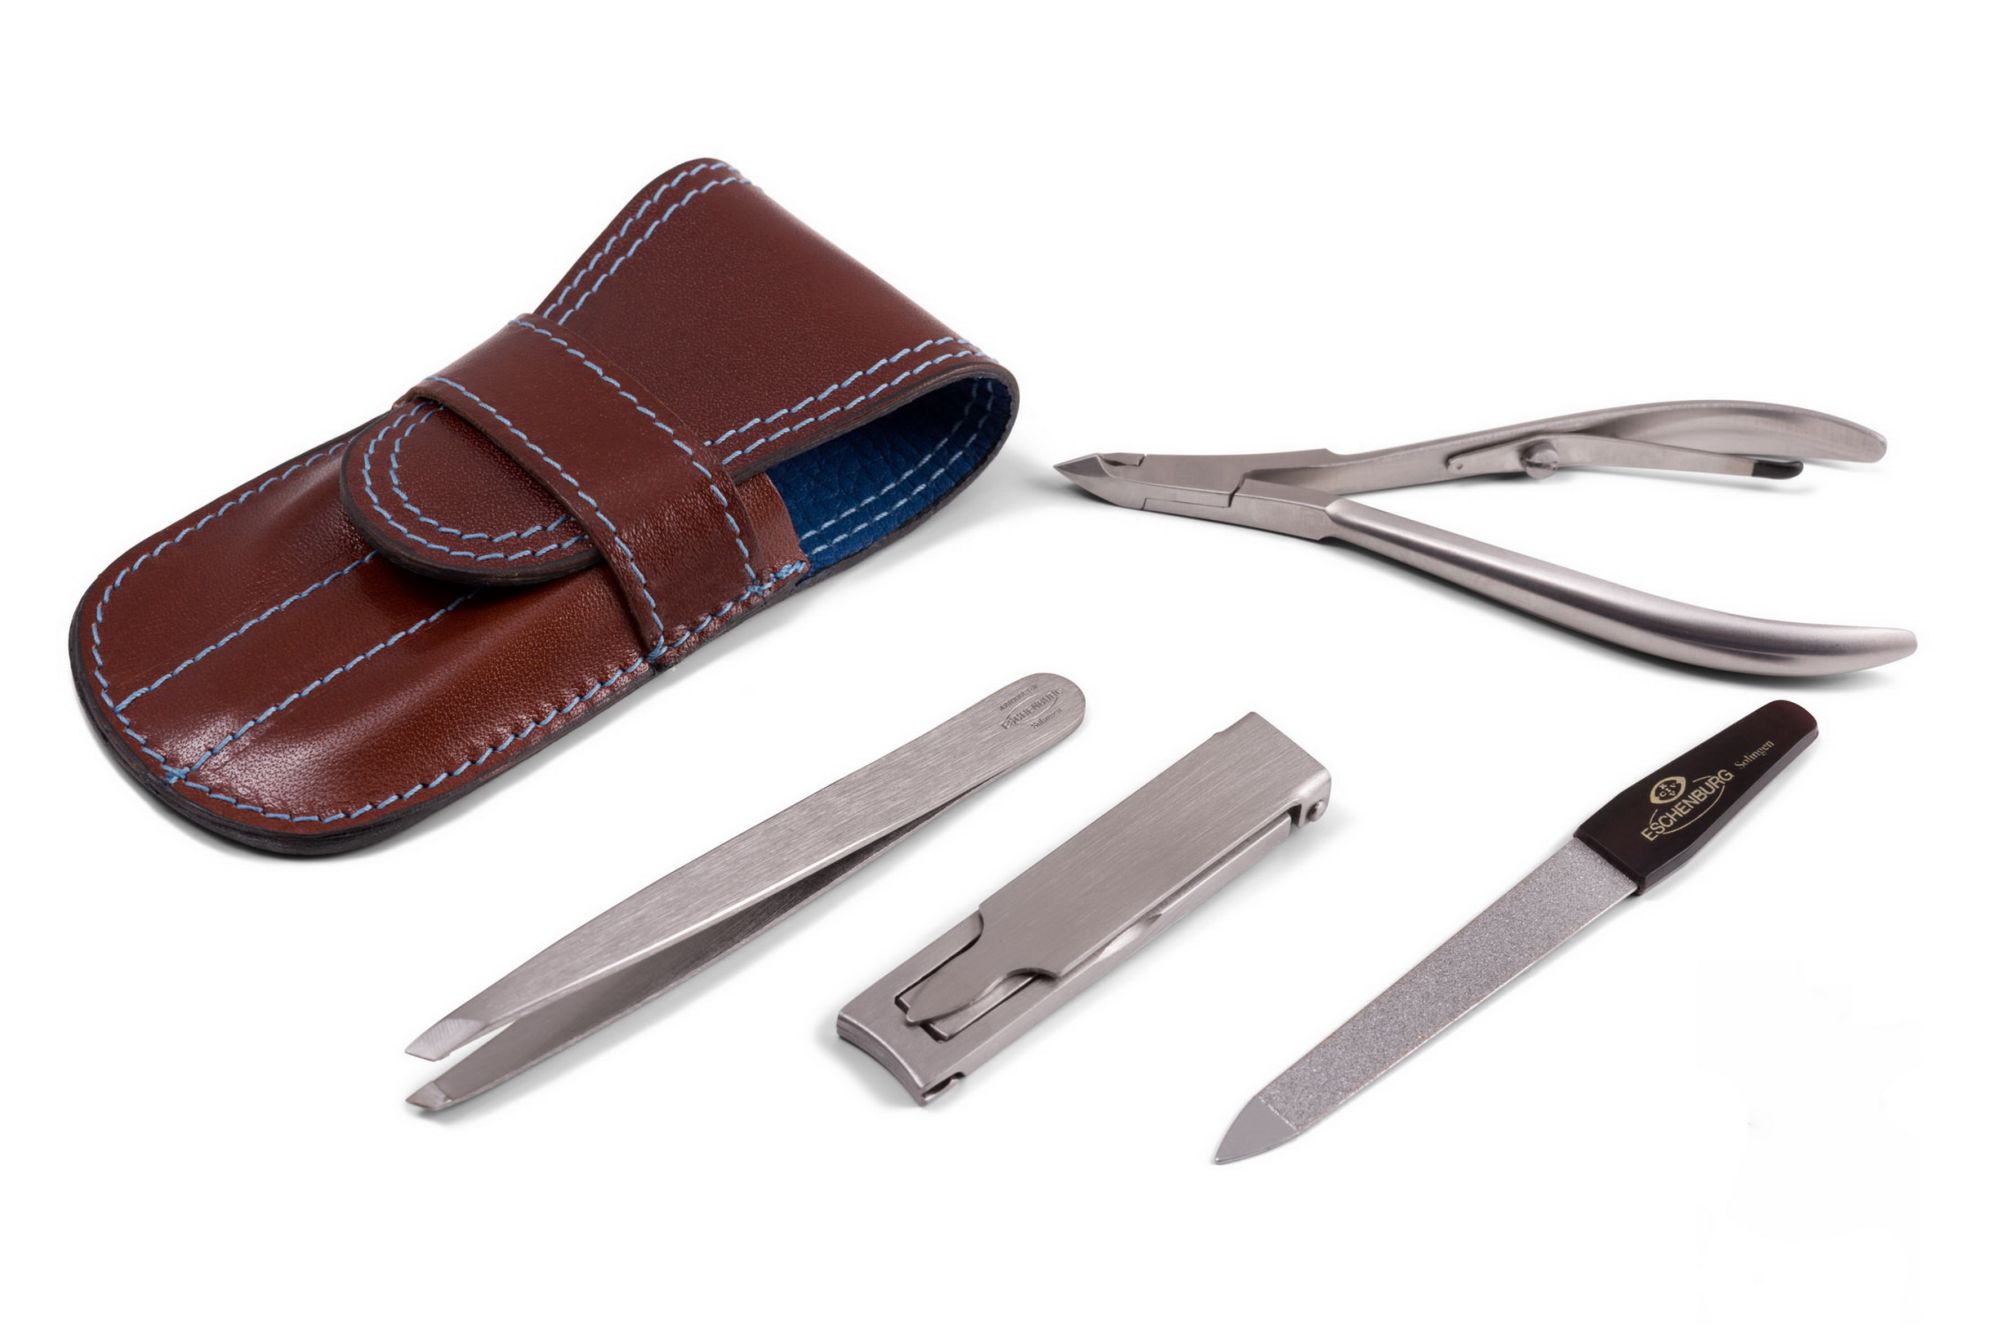 Men's Manicure Set Travel Kit Brown and Blue Leather and Stainless